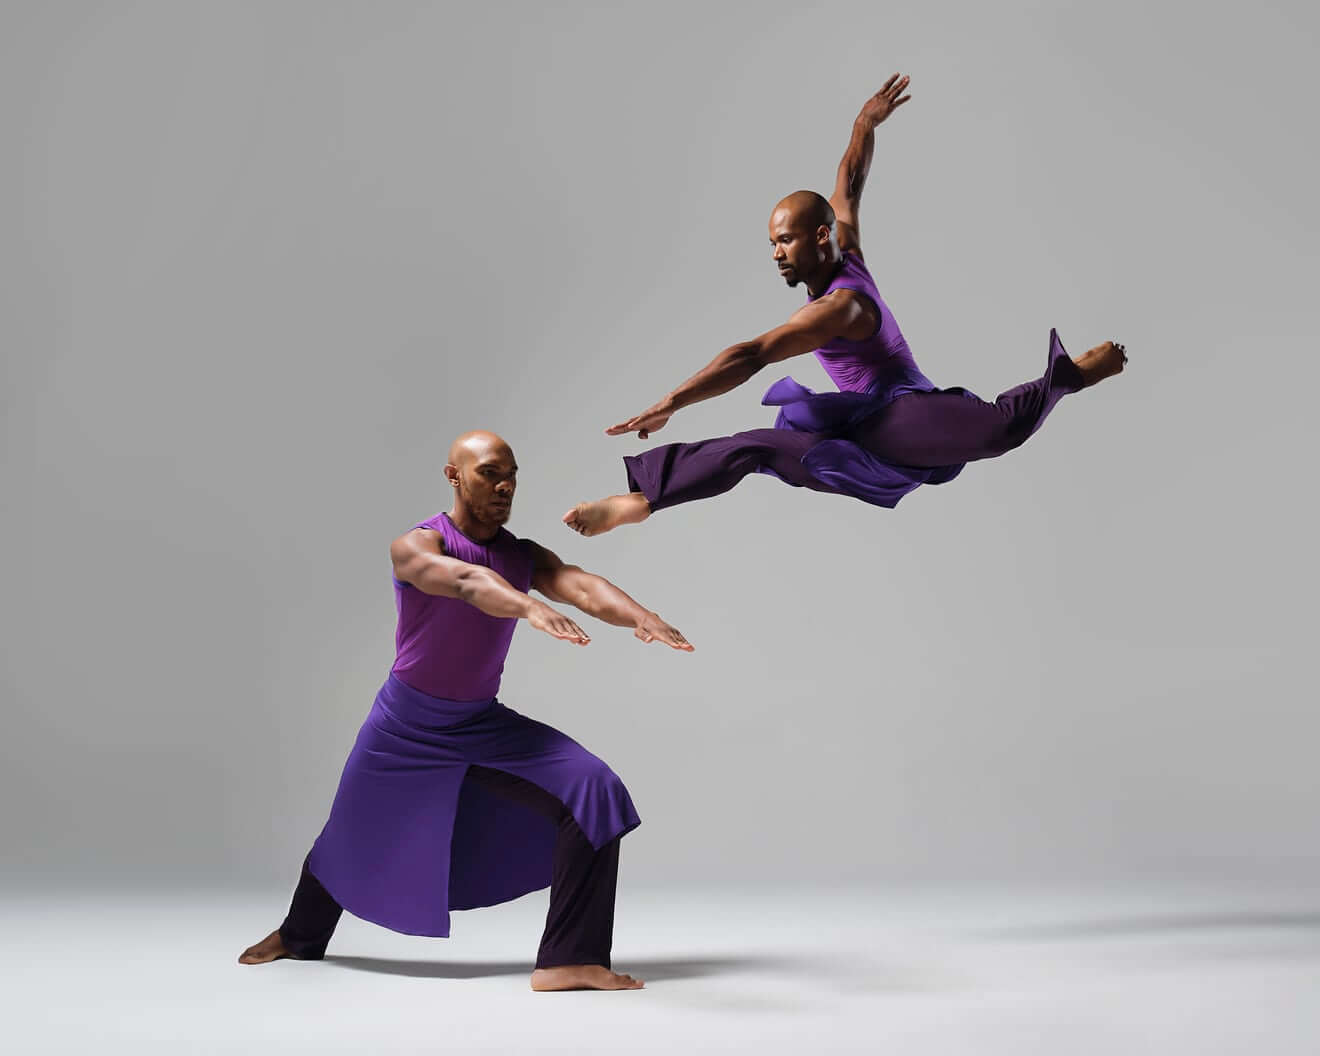 Two Black men dance against a white background, wearing royal purple costumes with sleeveless tops, pants, and flowing skirts with a slit in the front. One dancer lunges forward on one leg, the other extending behind and both arms reaching straight forward. The other artist leaps high in the air, legs slightly bent in a split.